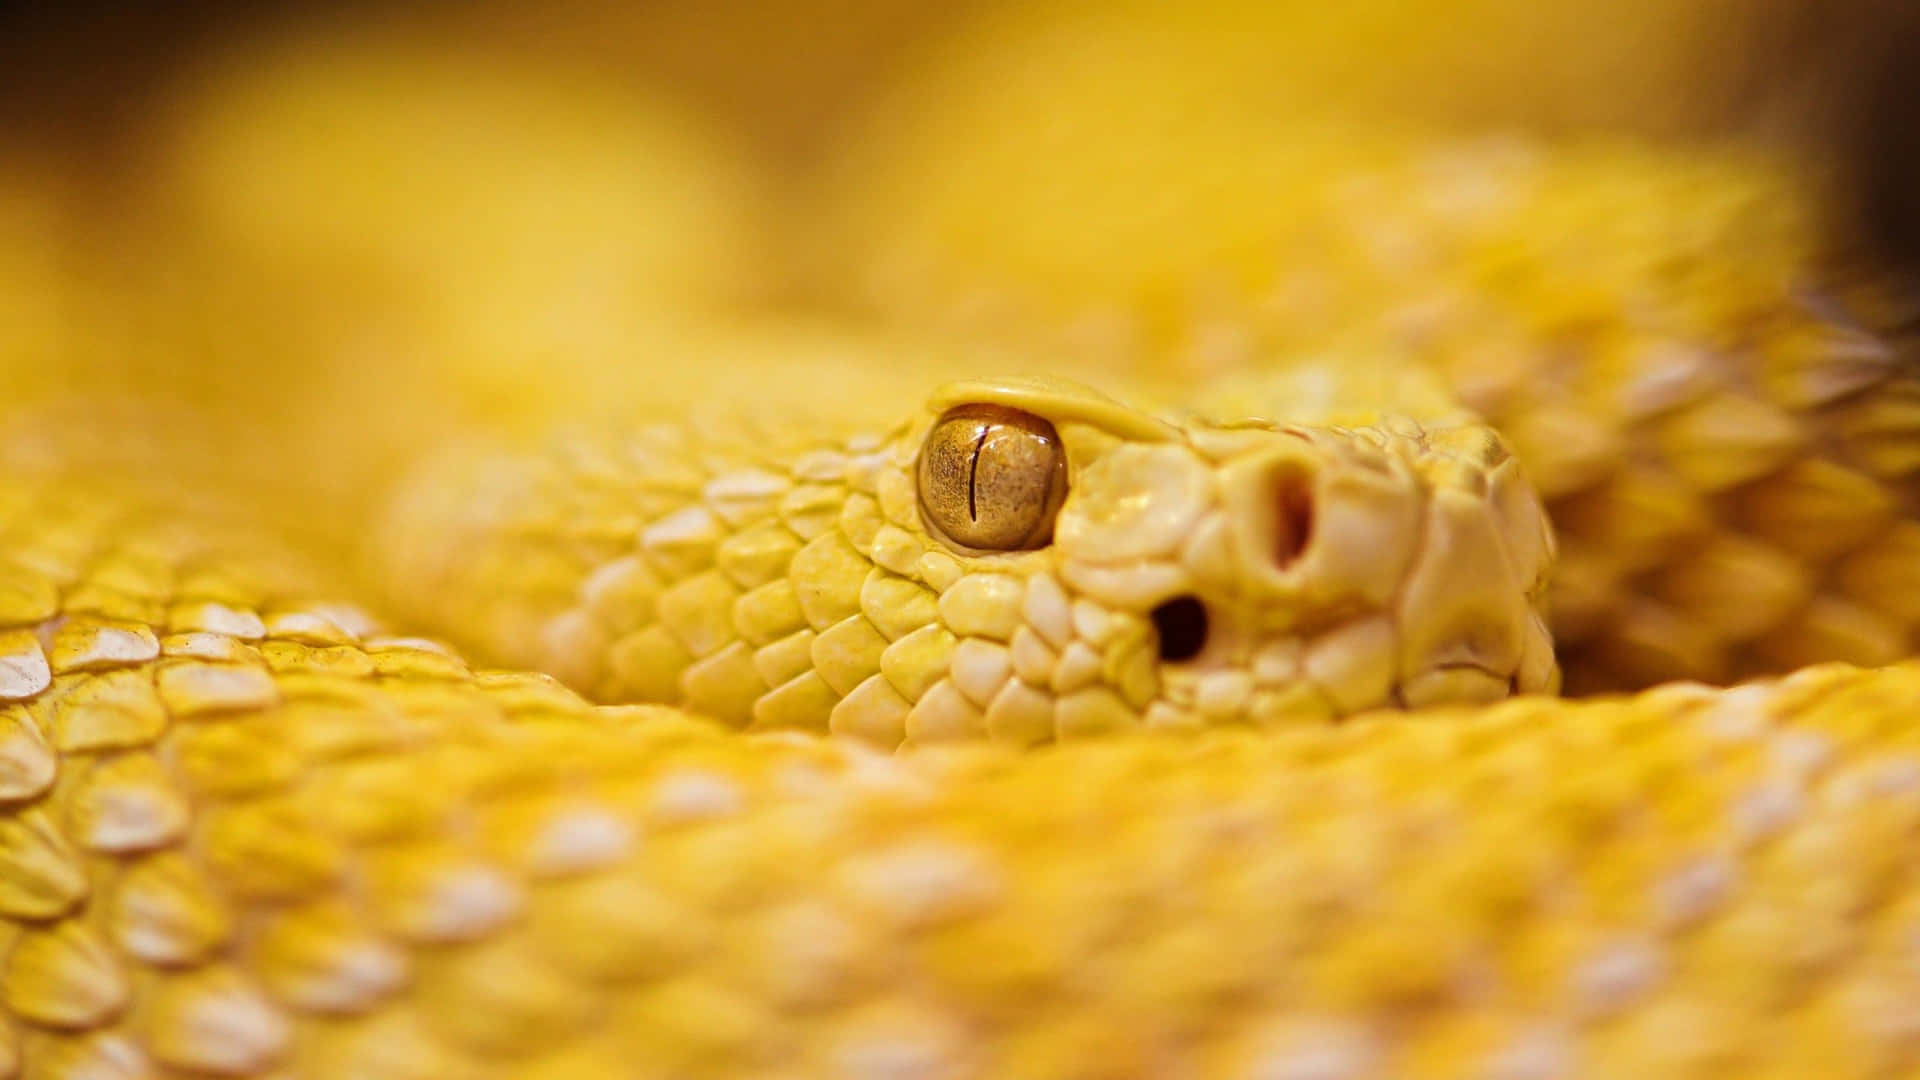 A Close Up Of A Yellow Snake